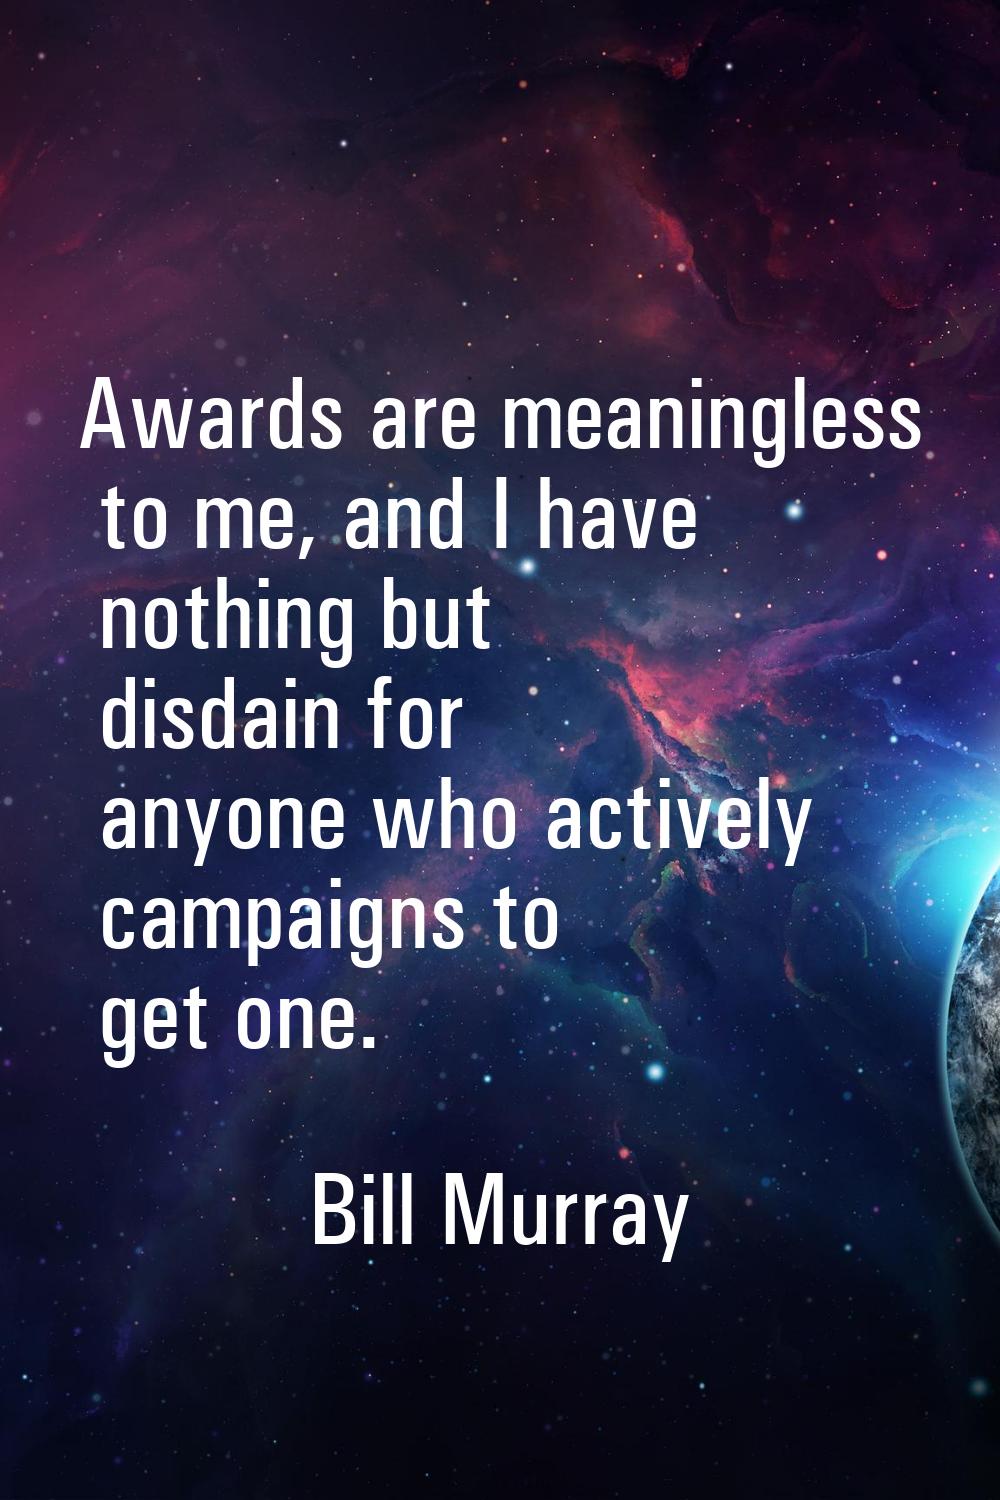 Awards are meaningless to me, and I have nothing but disdain for anyone who actively campaigns to g